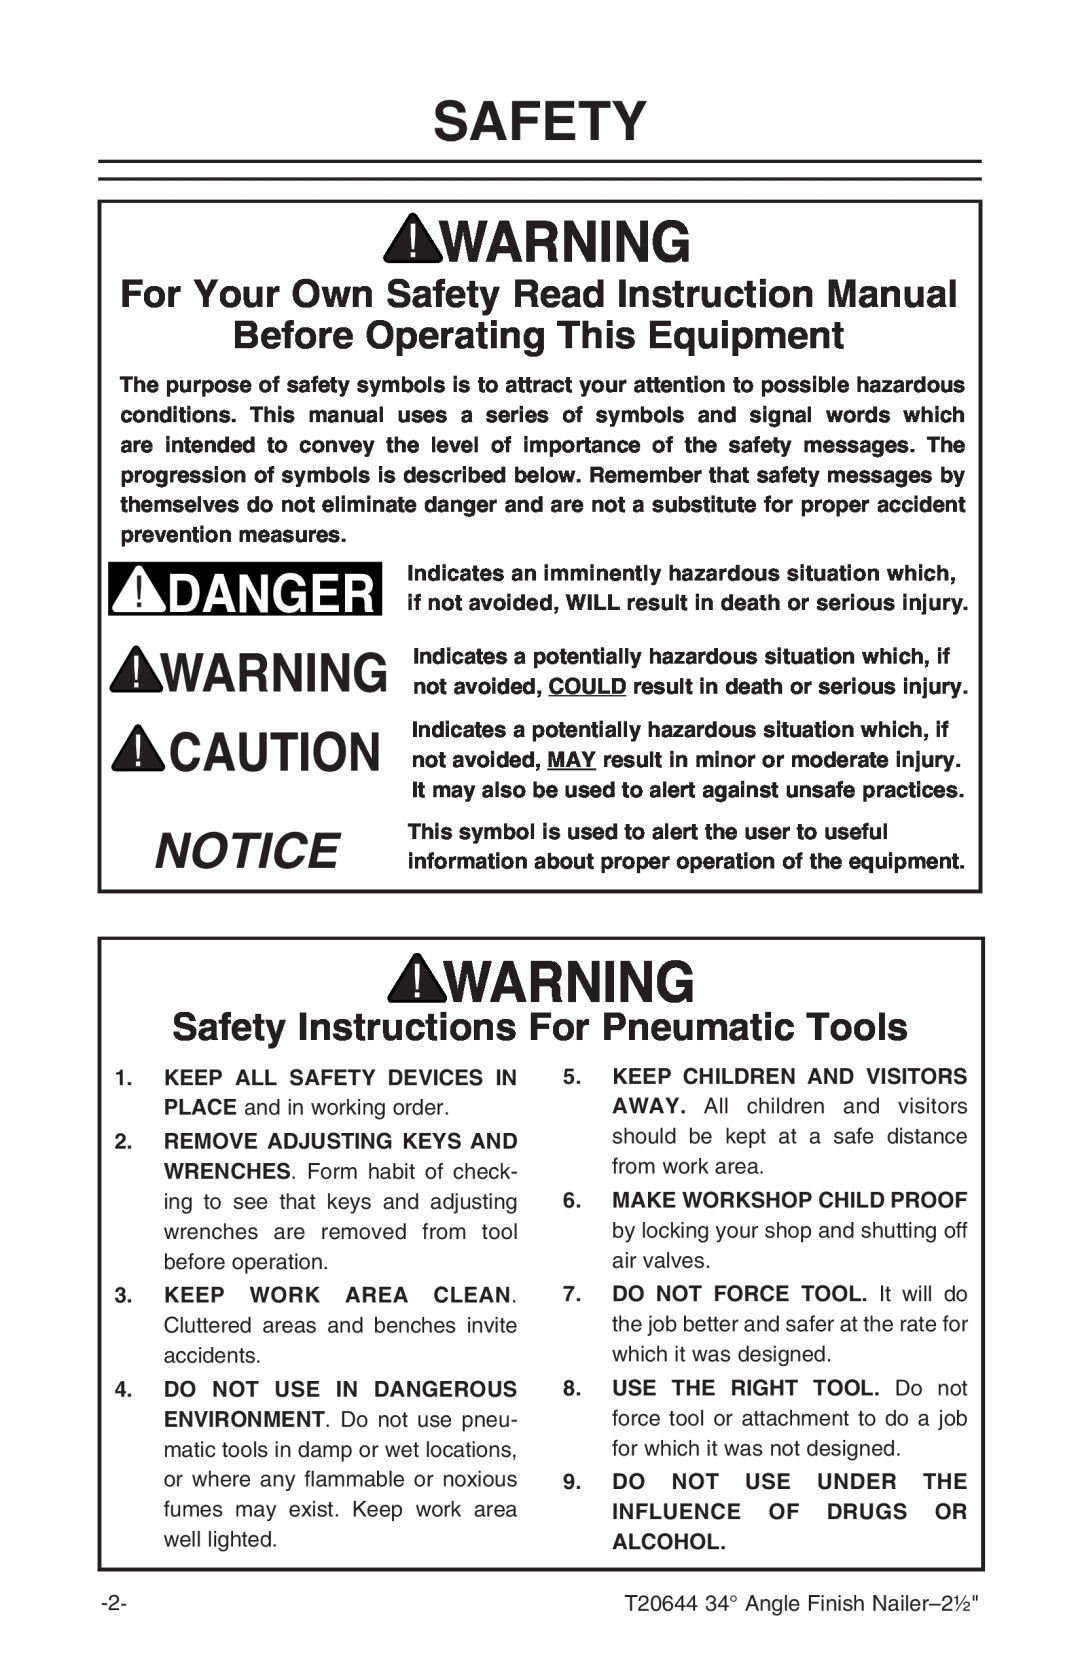 Grizzly T20644 instruction manual For Your Own Safety Read Instruction Manual, Before Operating This Equipment 